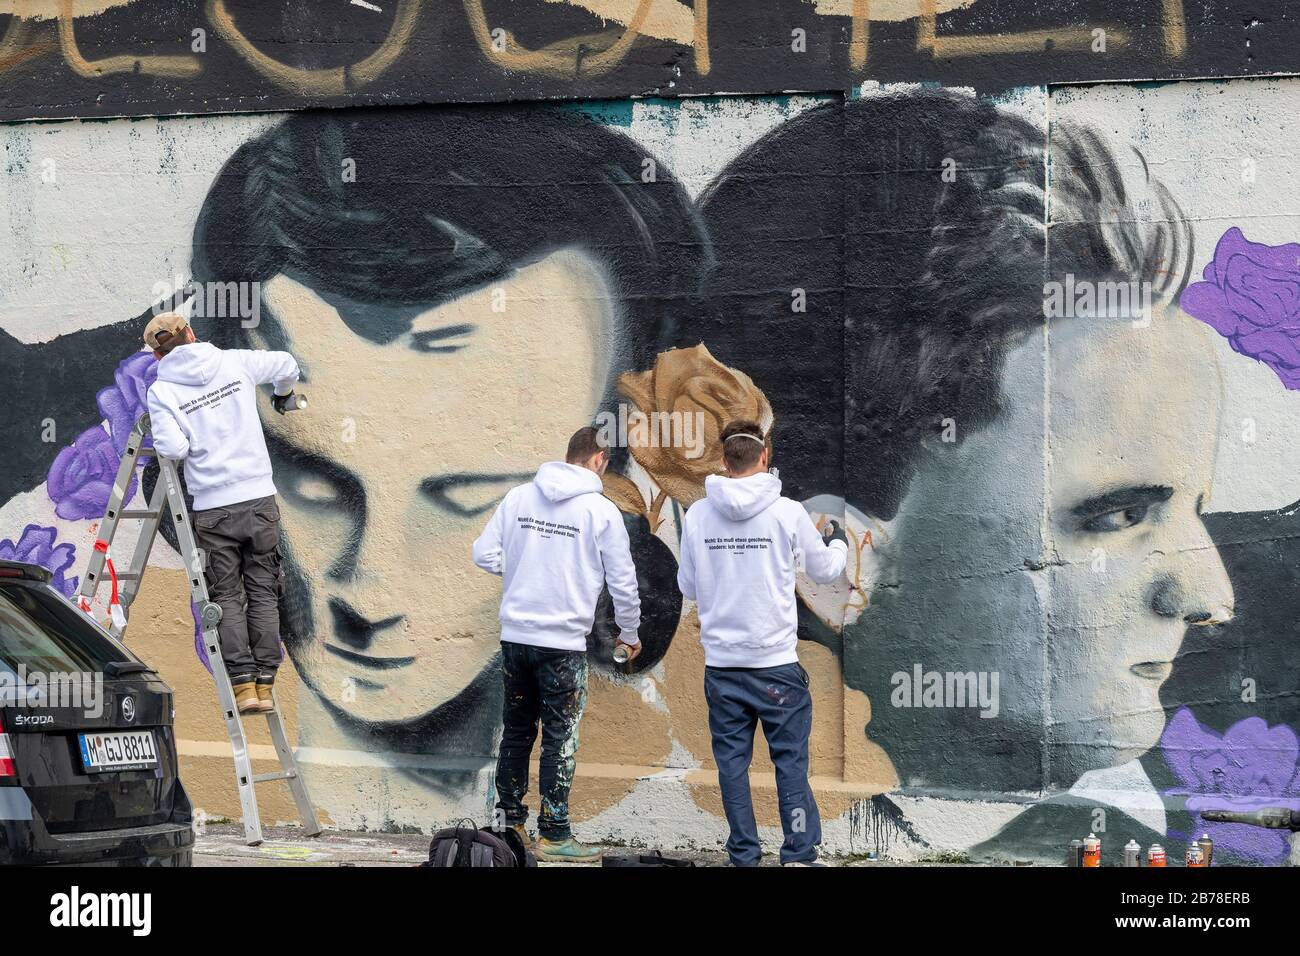 Munich, Germany. 14th Mar, 2020. Three men are working on a graffito with the portrait of Hans Scholl from the resistance group Weiße Rose in the Third Reich, which the Verein zur Förderung urbaner Kunst has invited to realize. The conceptual artwork is being created on the grounds of the slaughterhouse. Credit: Peter Kneffel/dpa/Alamy Live News Stock Photo